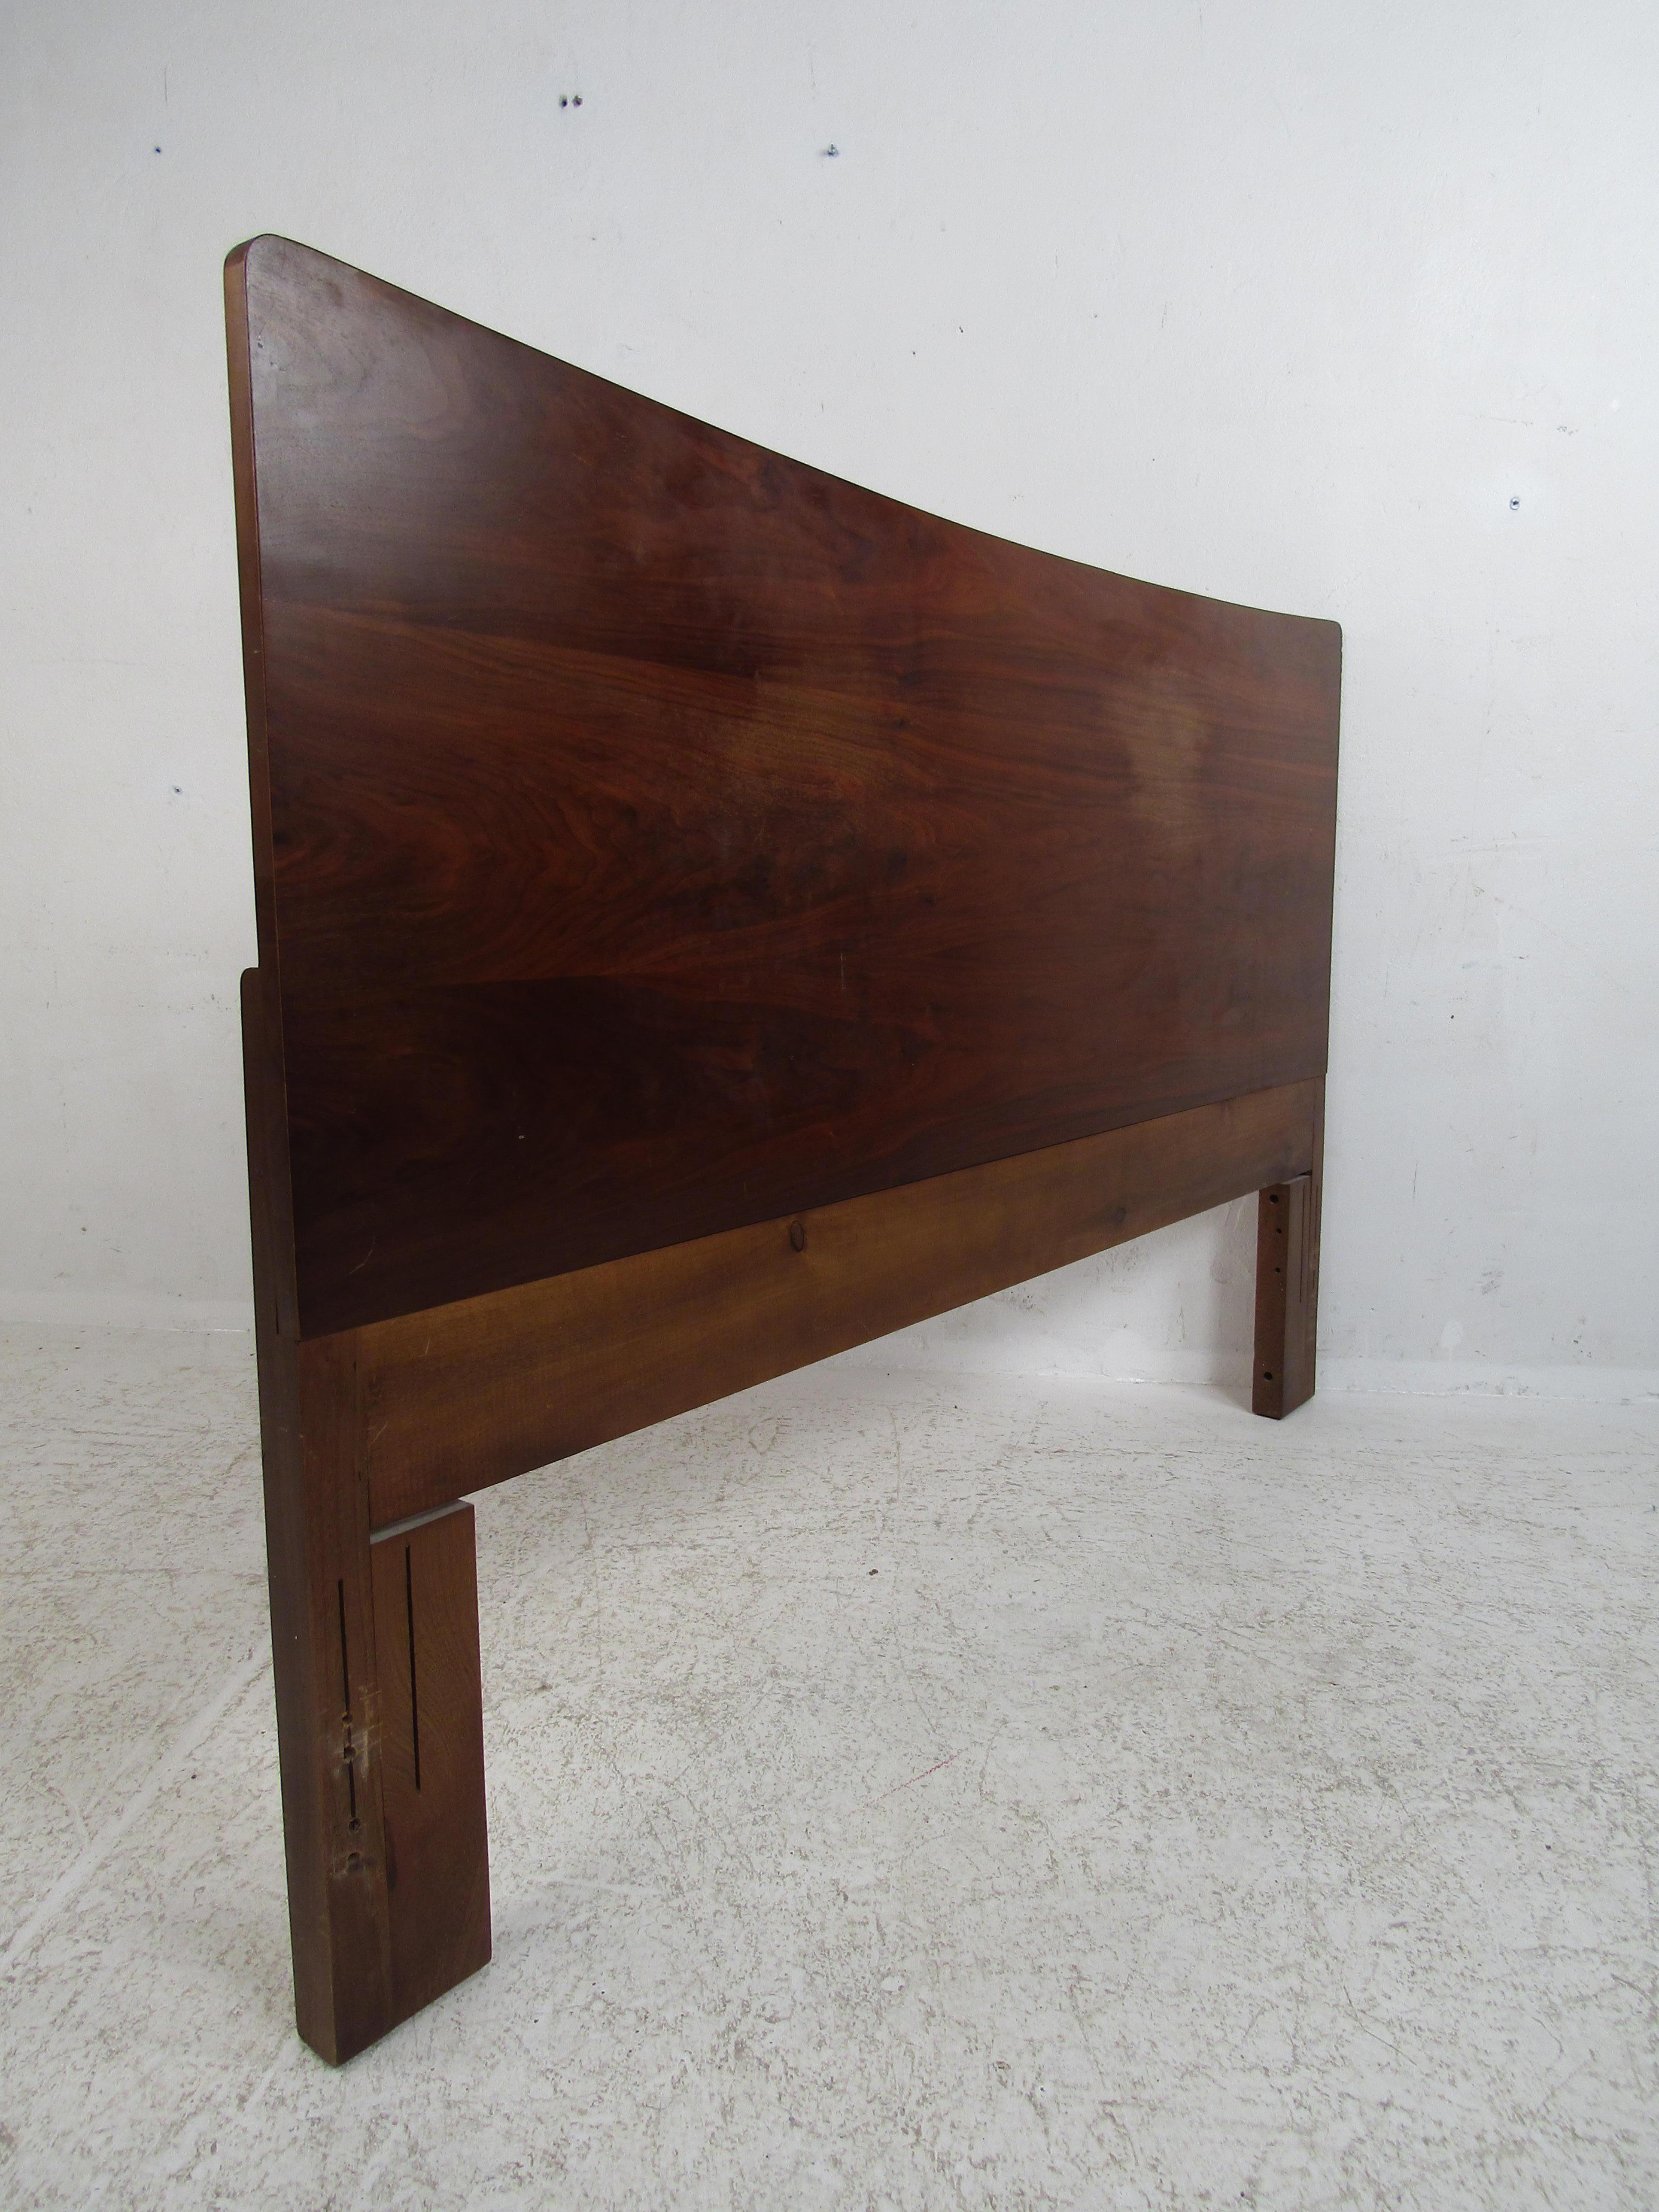 This vintage midcentury headboard features a simple yet eloquent design. A dark walnut finish with a curved top adds to the appeal of this perfect bedroom addition. Fits a queen size mattress. Please confirm item location (NY or NJ).